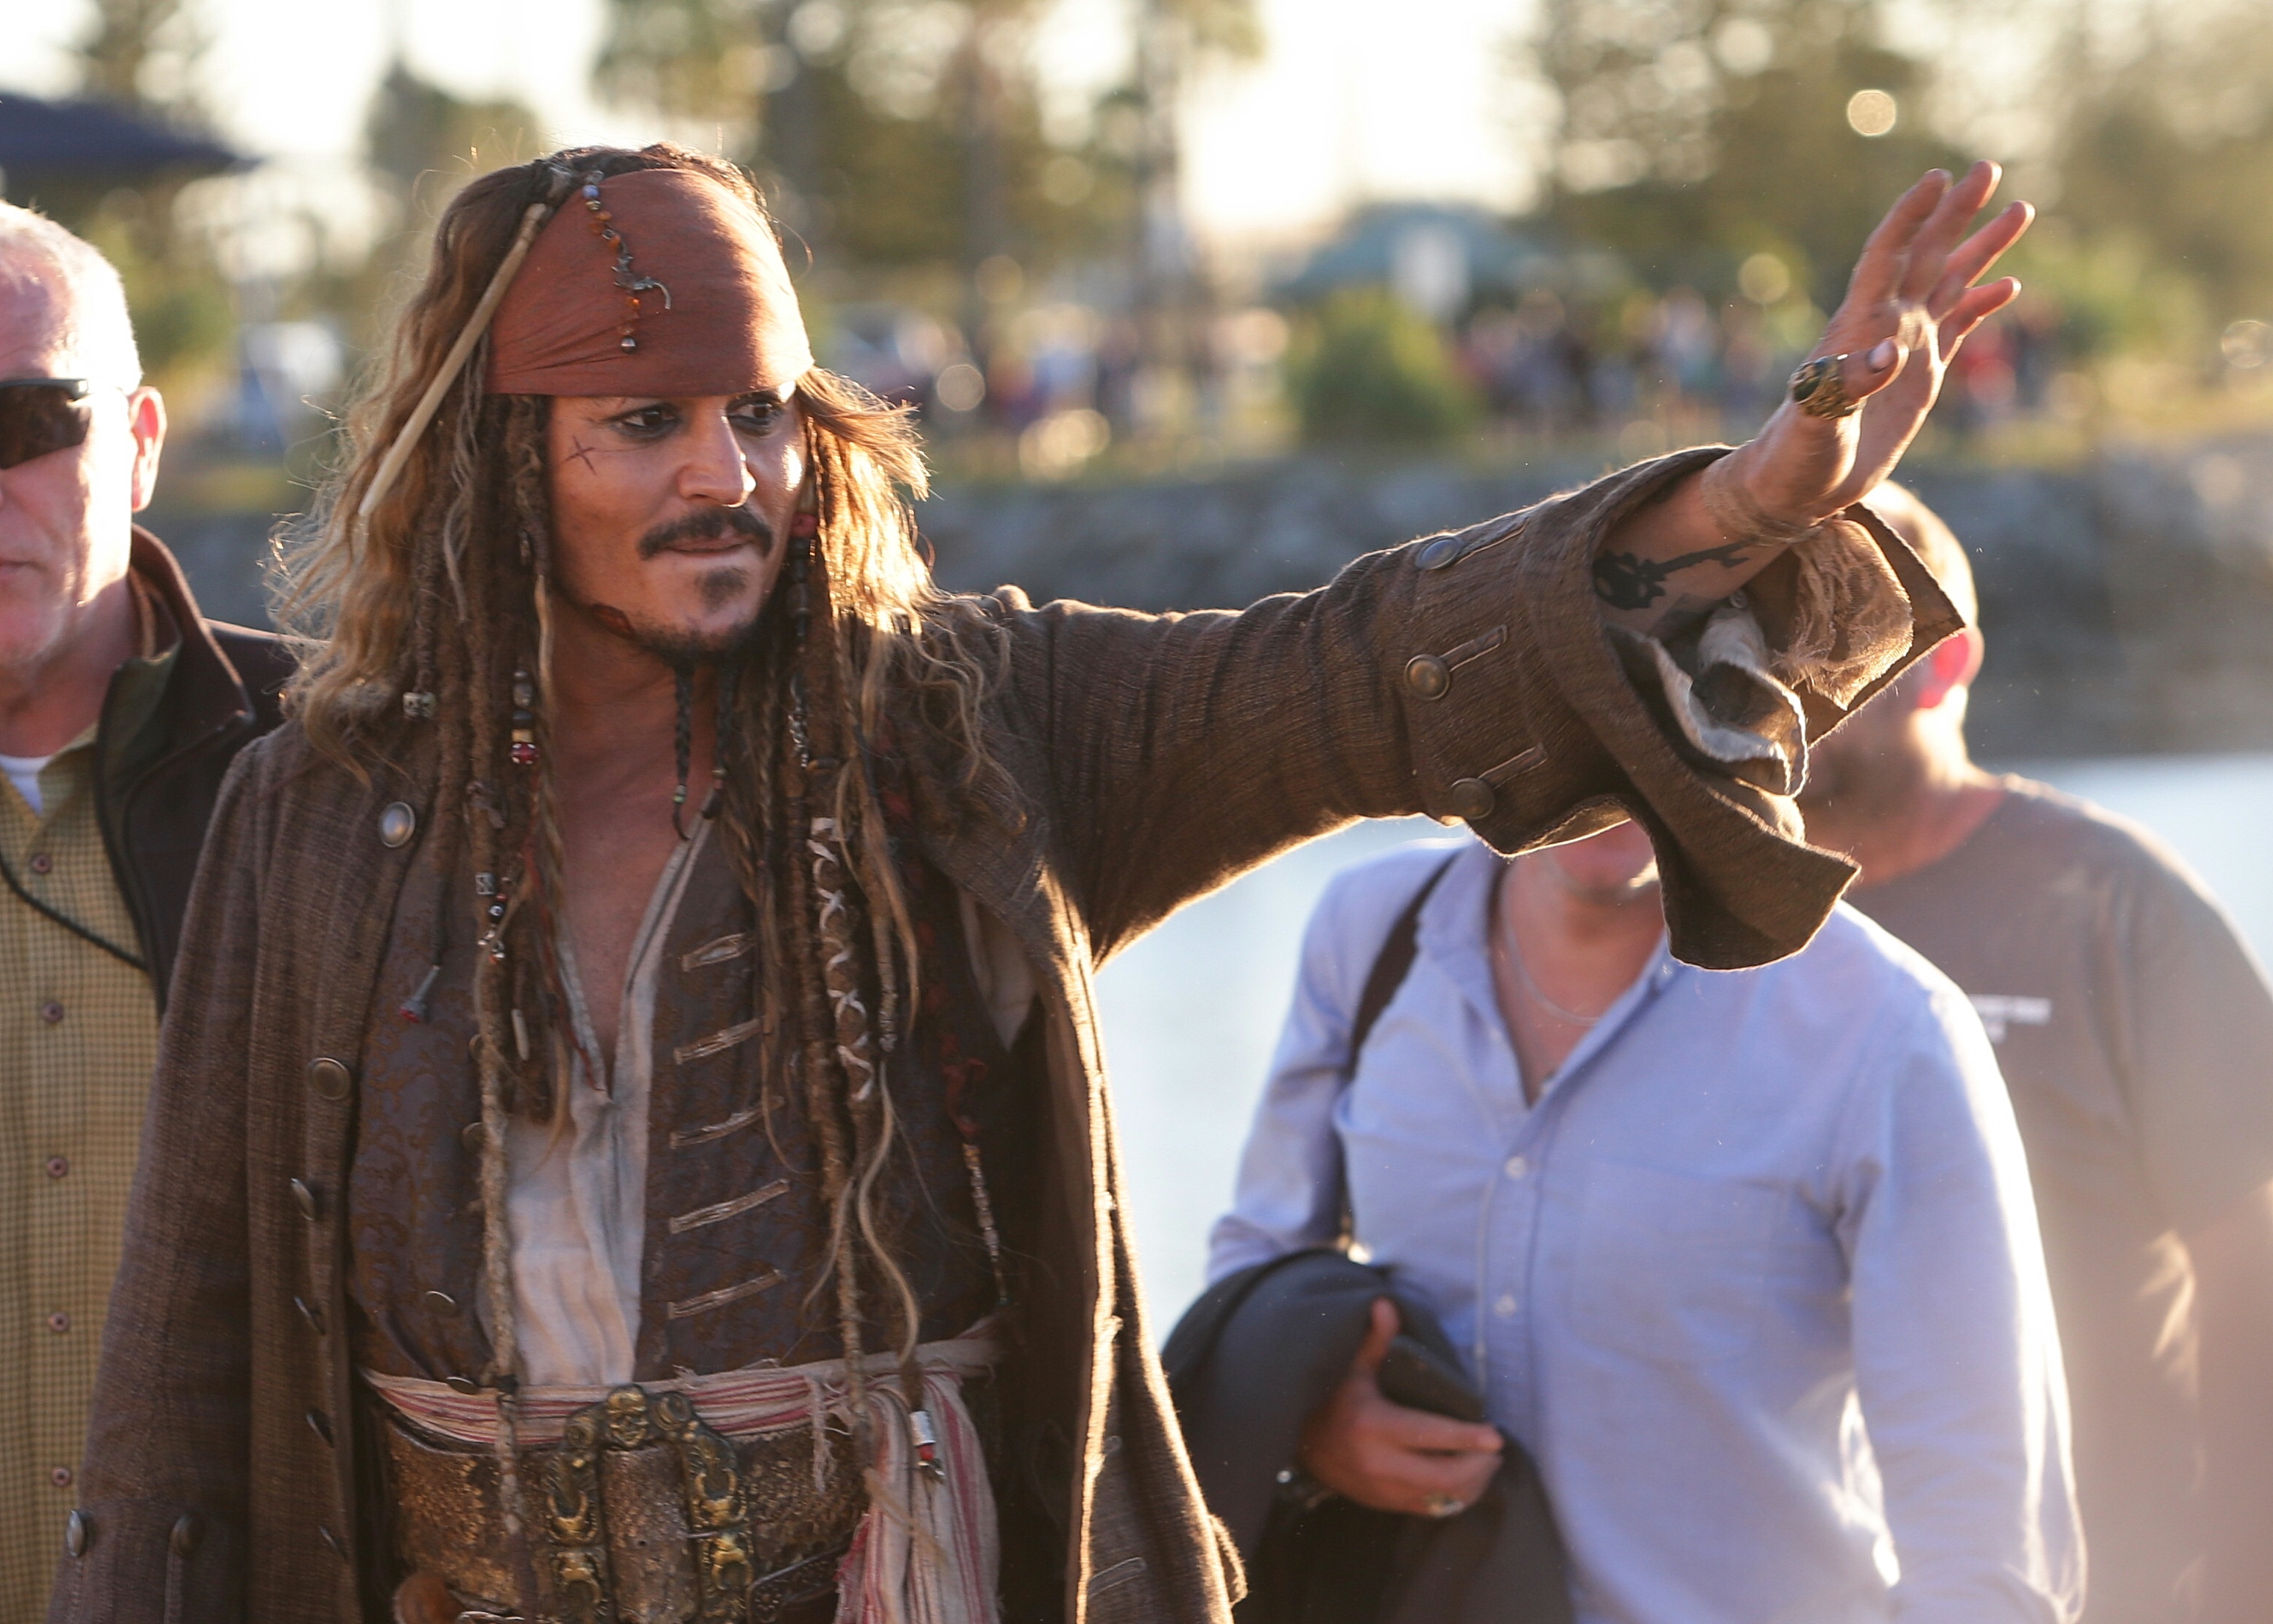 Johnny Depp greets fans in costume as Jack Sparrow after after a day of filming 'Pirates of the Caribbean: Dead Men Tell No Tales